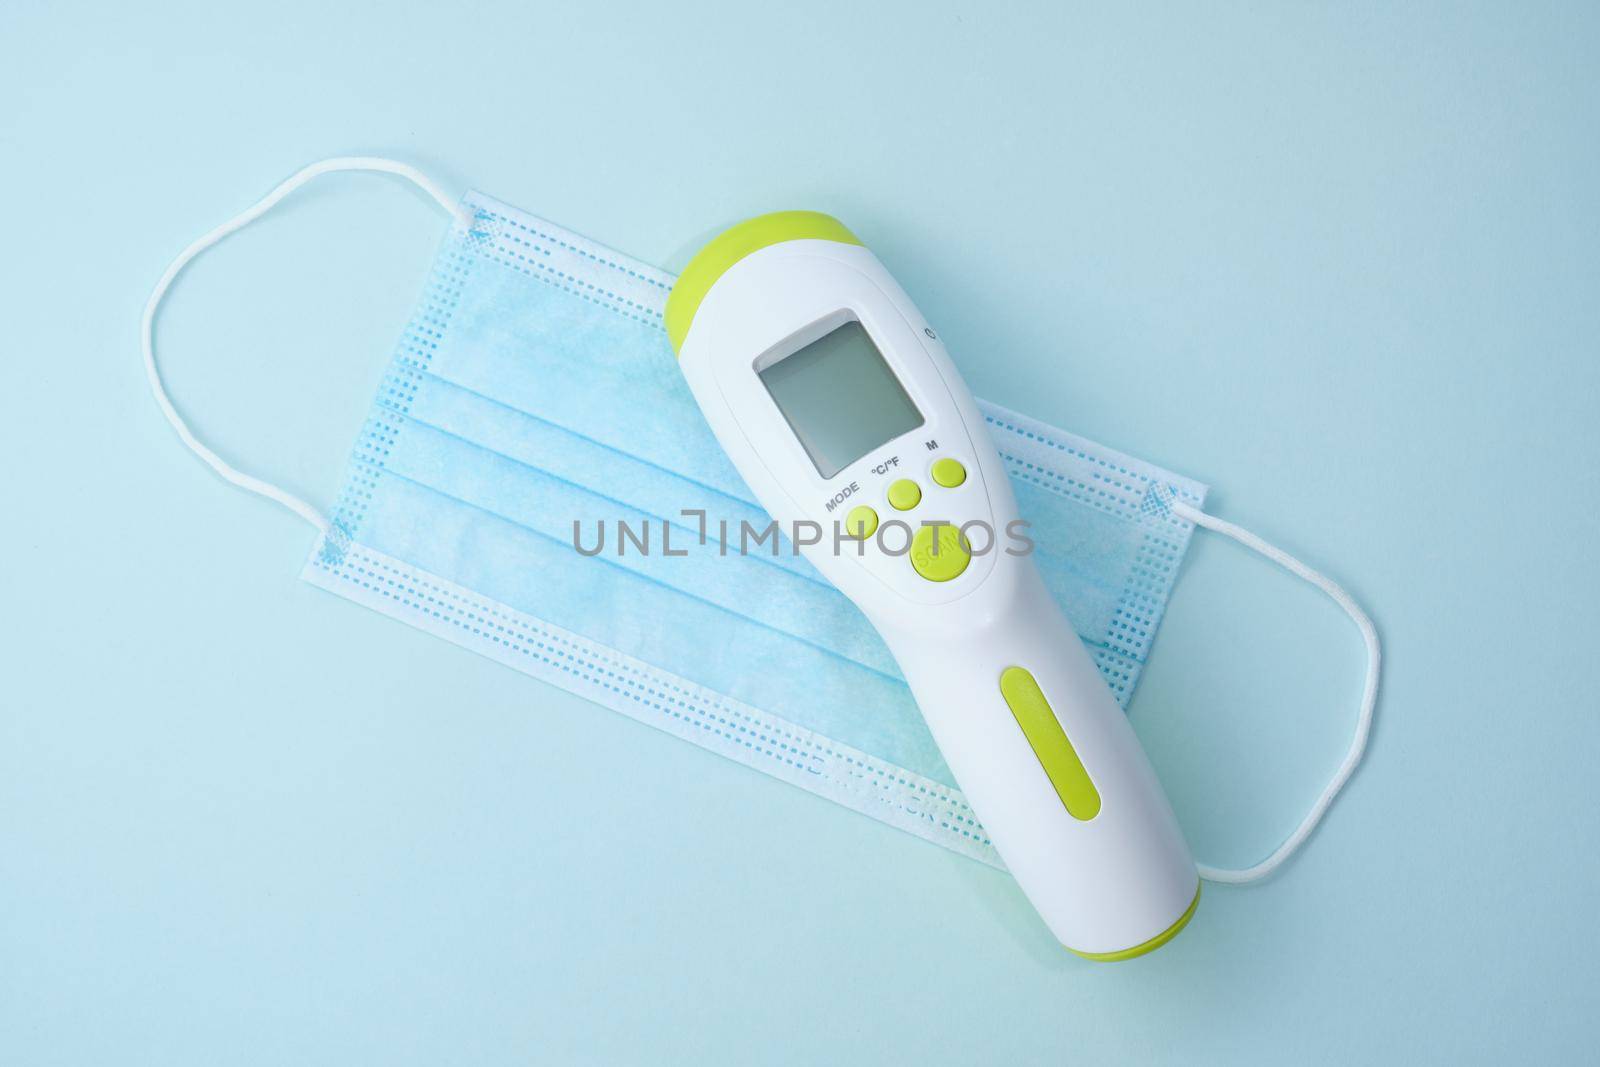 Digital medical infrared non contact thermometer gun for measuring temperature, face mask on blue background for coronavirus COVID-19 testing. Medicine concept.